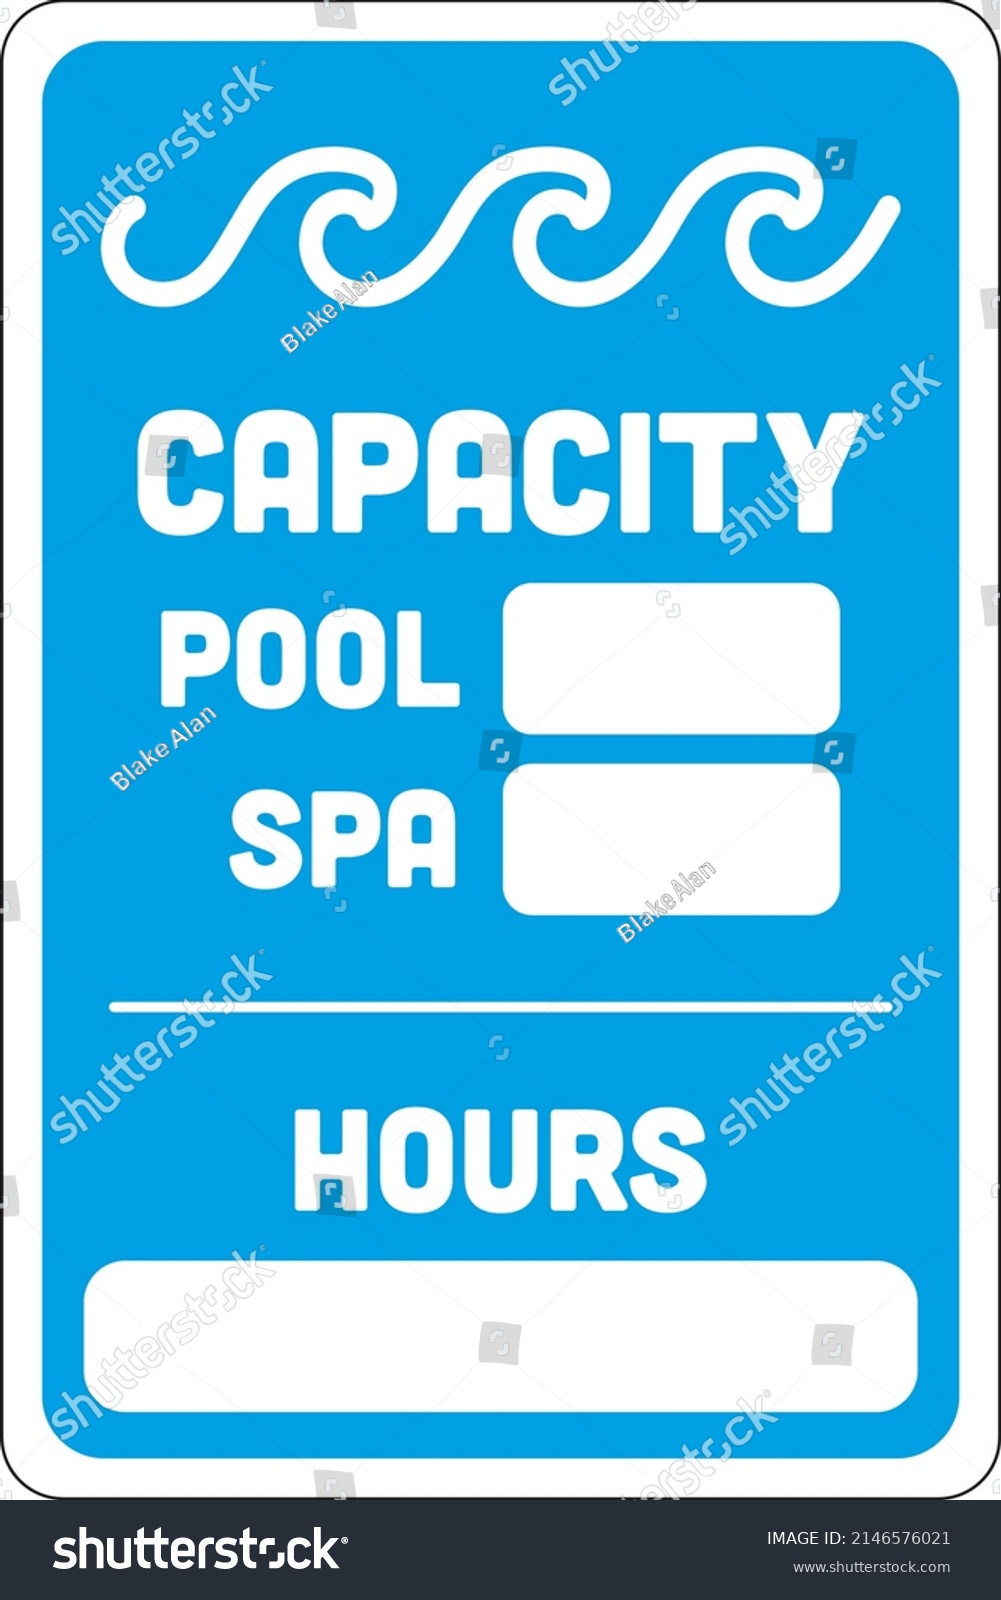 SVG of Pool and Spa Capacity Sign with Facility Hours | Template for Public Pools, Hotels and Apartments svg